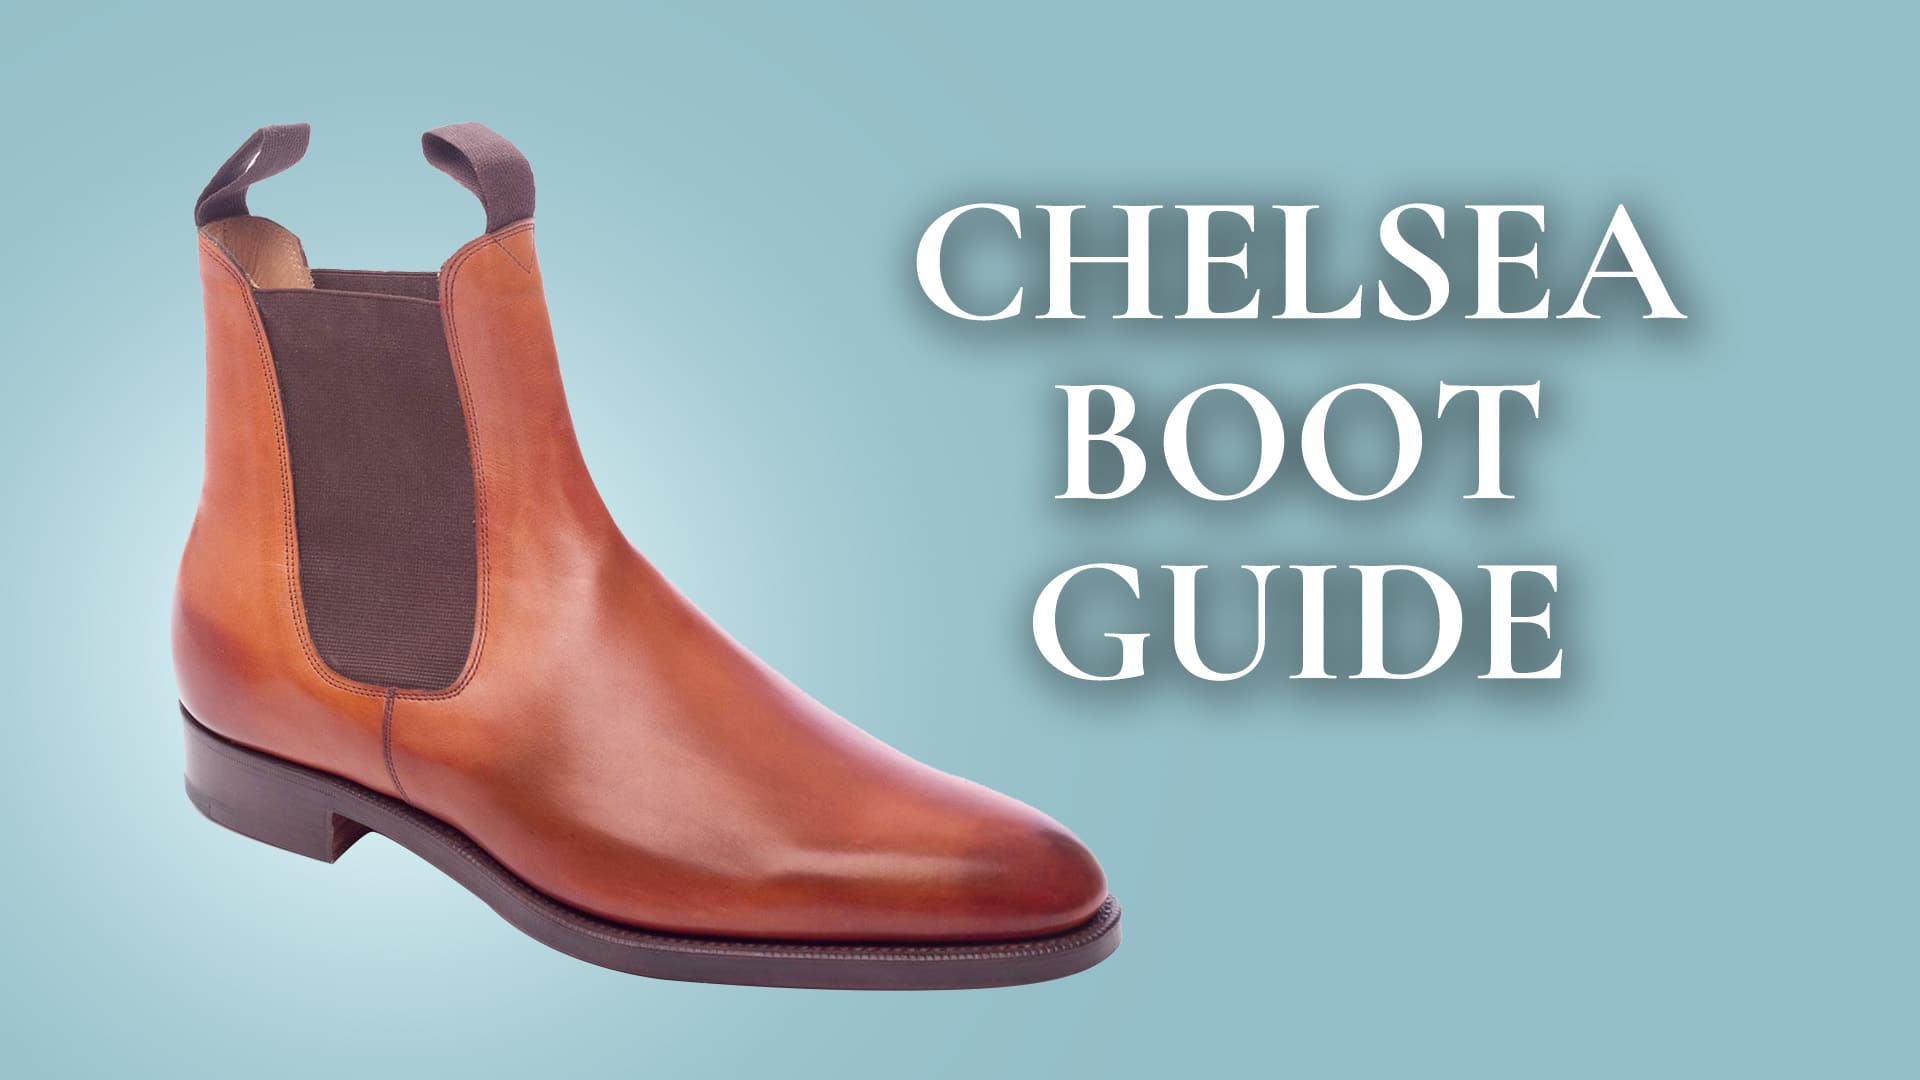 The Chelsea Boots Guide - A Boot